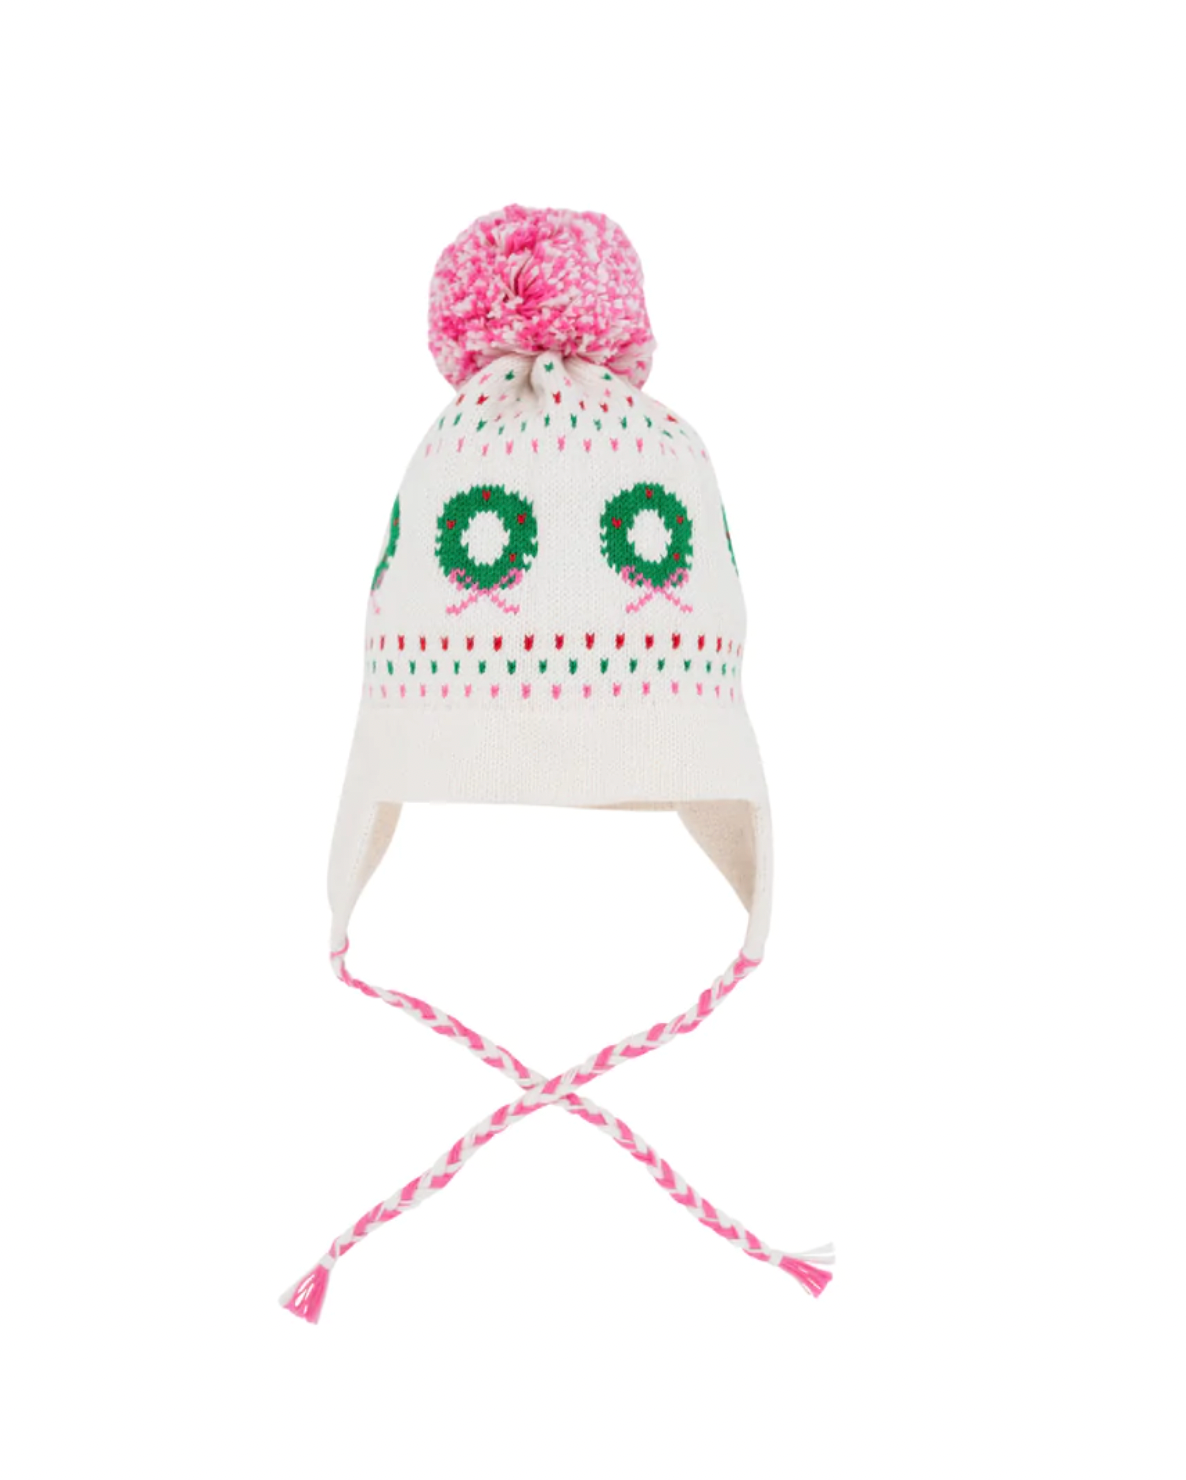 Parrish Pom Pom Hat-Palmetto Pearl With Hamptons Hot Pink & Wreaths